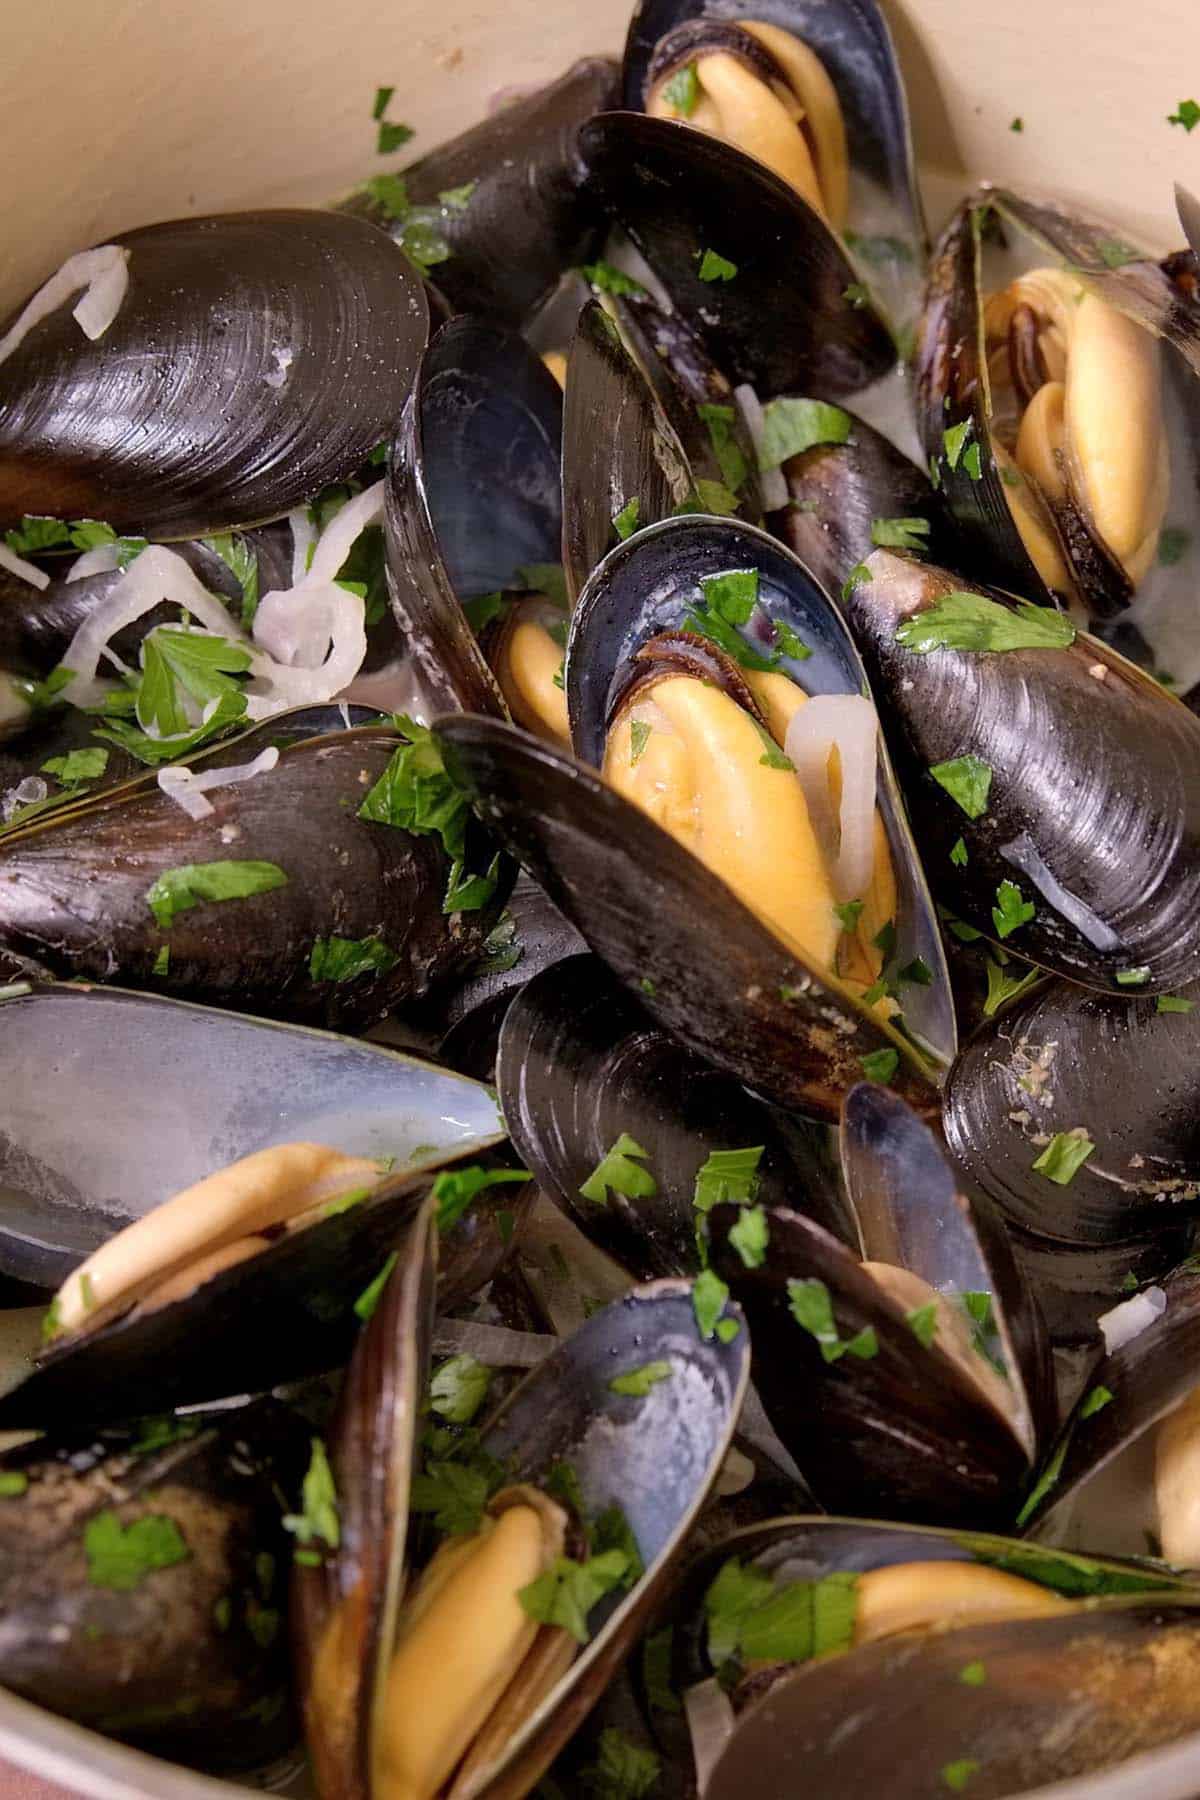 Steamed Mussels with White Wine Broth - Про Любовь...